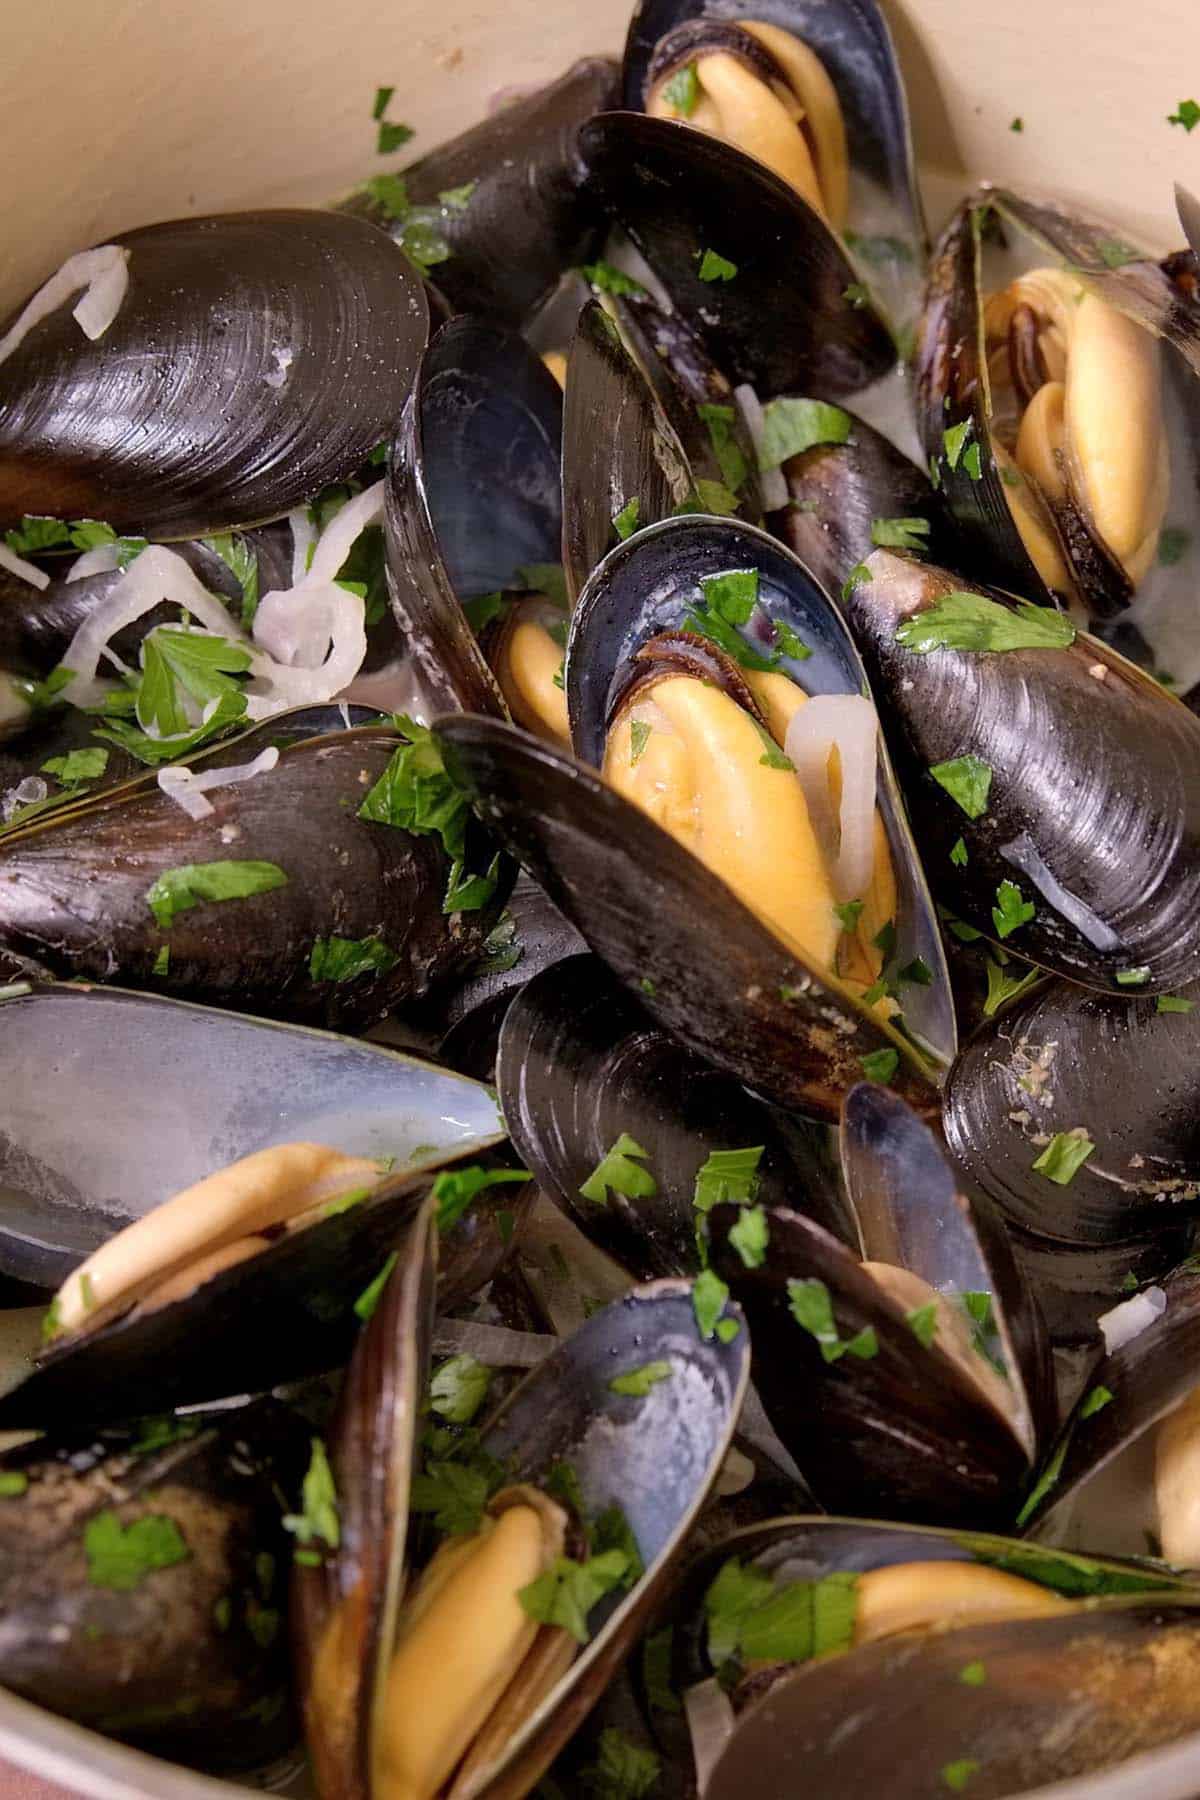 Steamed Mussels with White Wine Broth - Про Любовь...